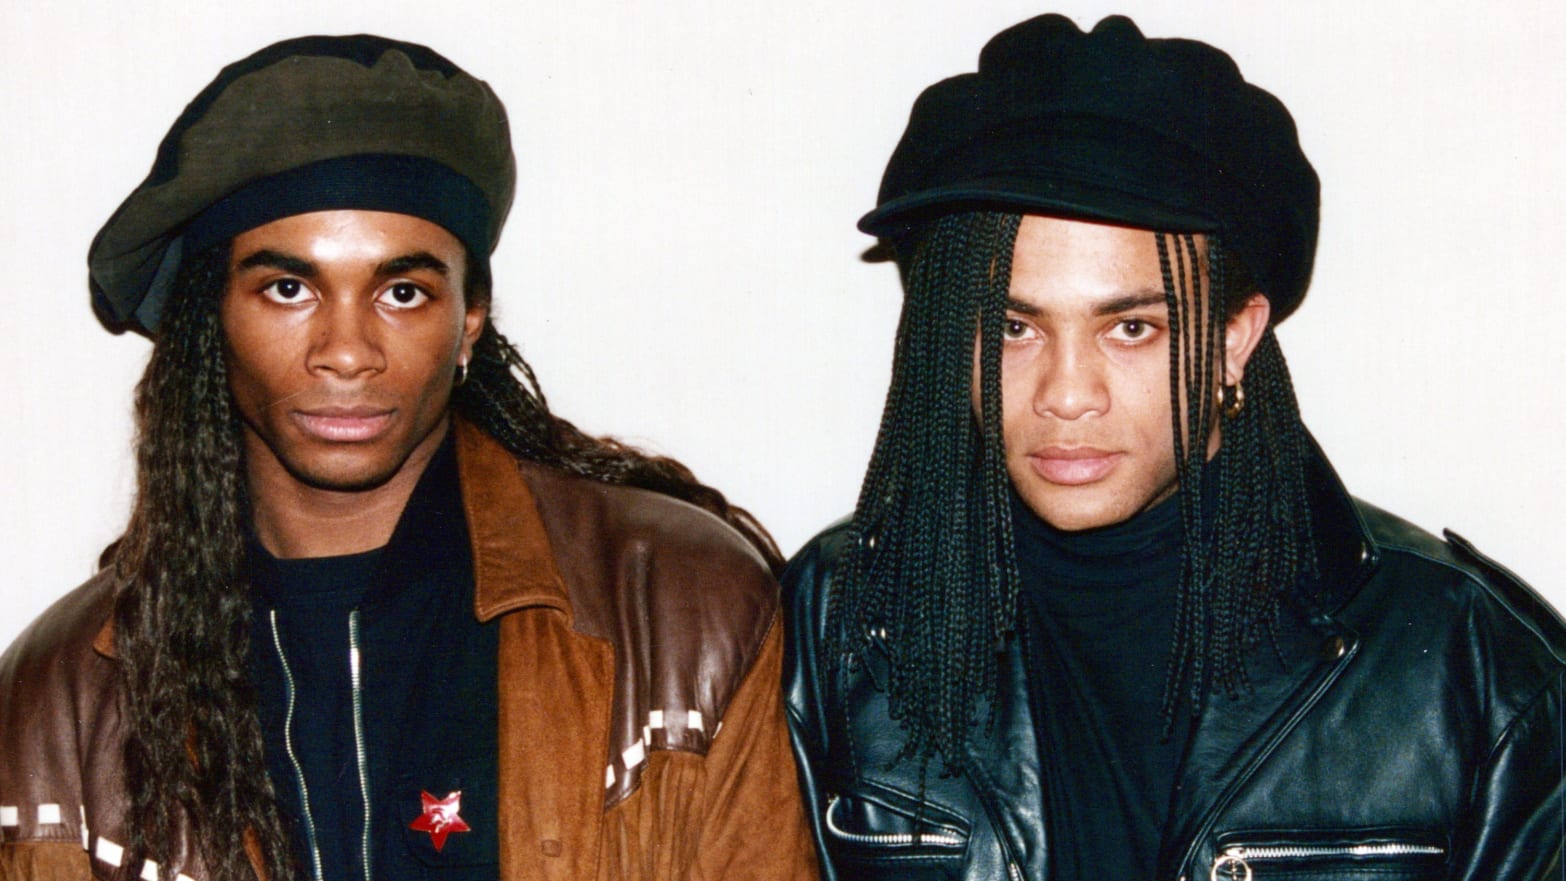 A photo of Milli Vanilli's Fab Morvan and Rob Pilatus against a white background